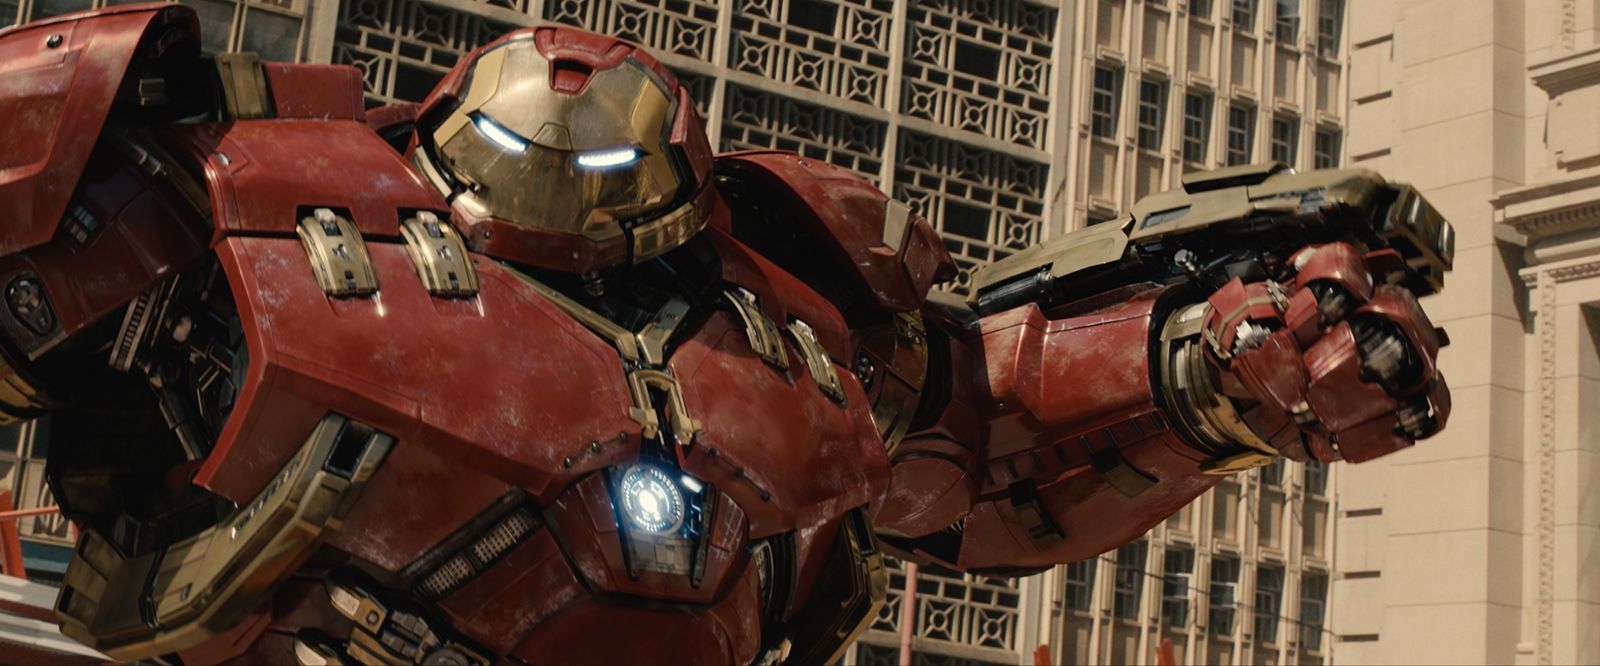 strap on the hulkbuster iron man armour from avengers age of ultron in ar at imax cinemas image 1